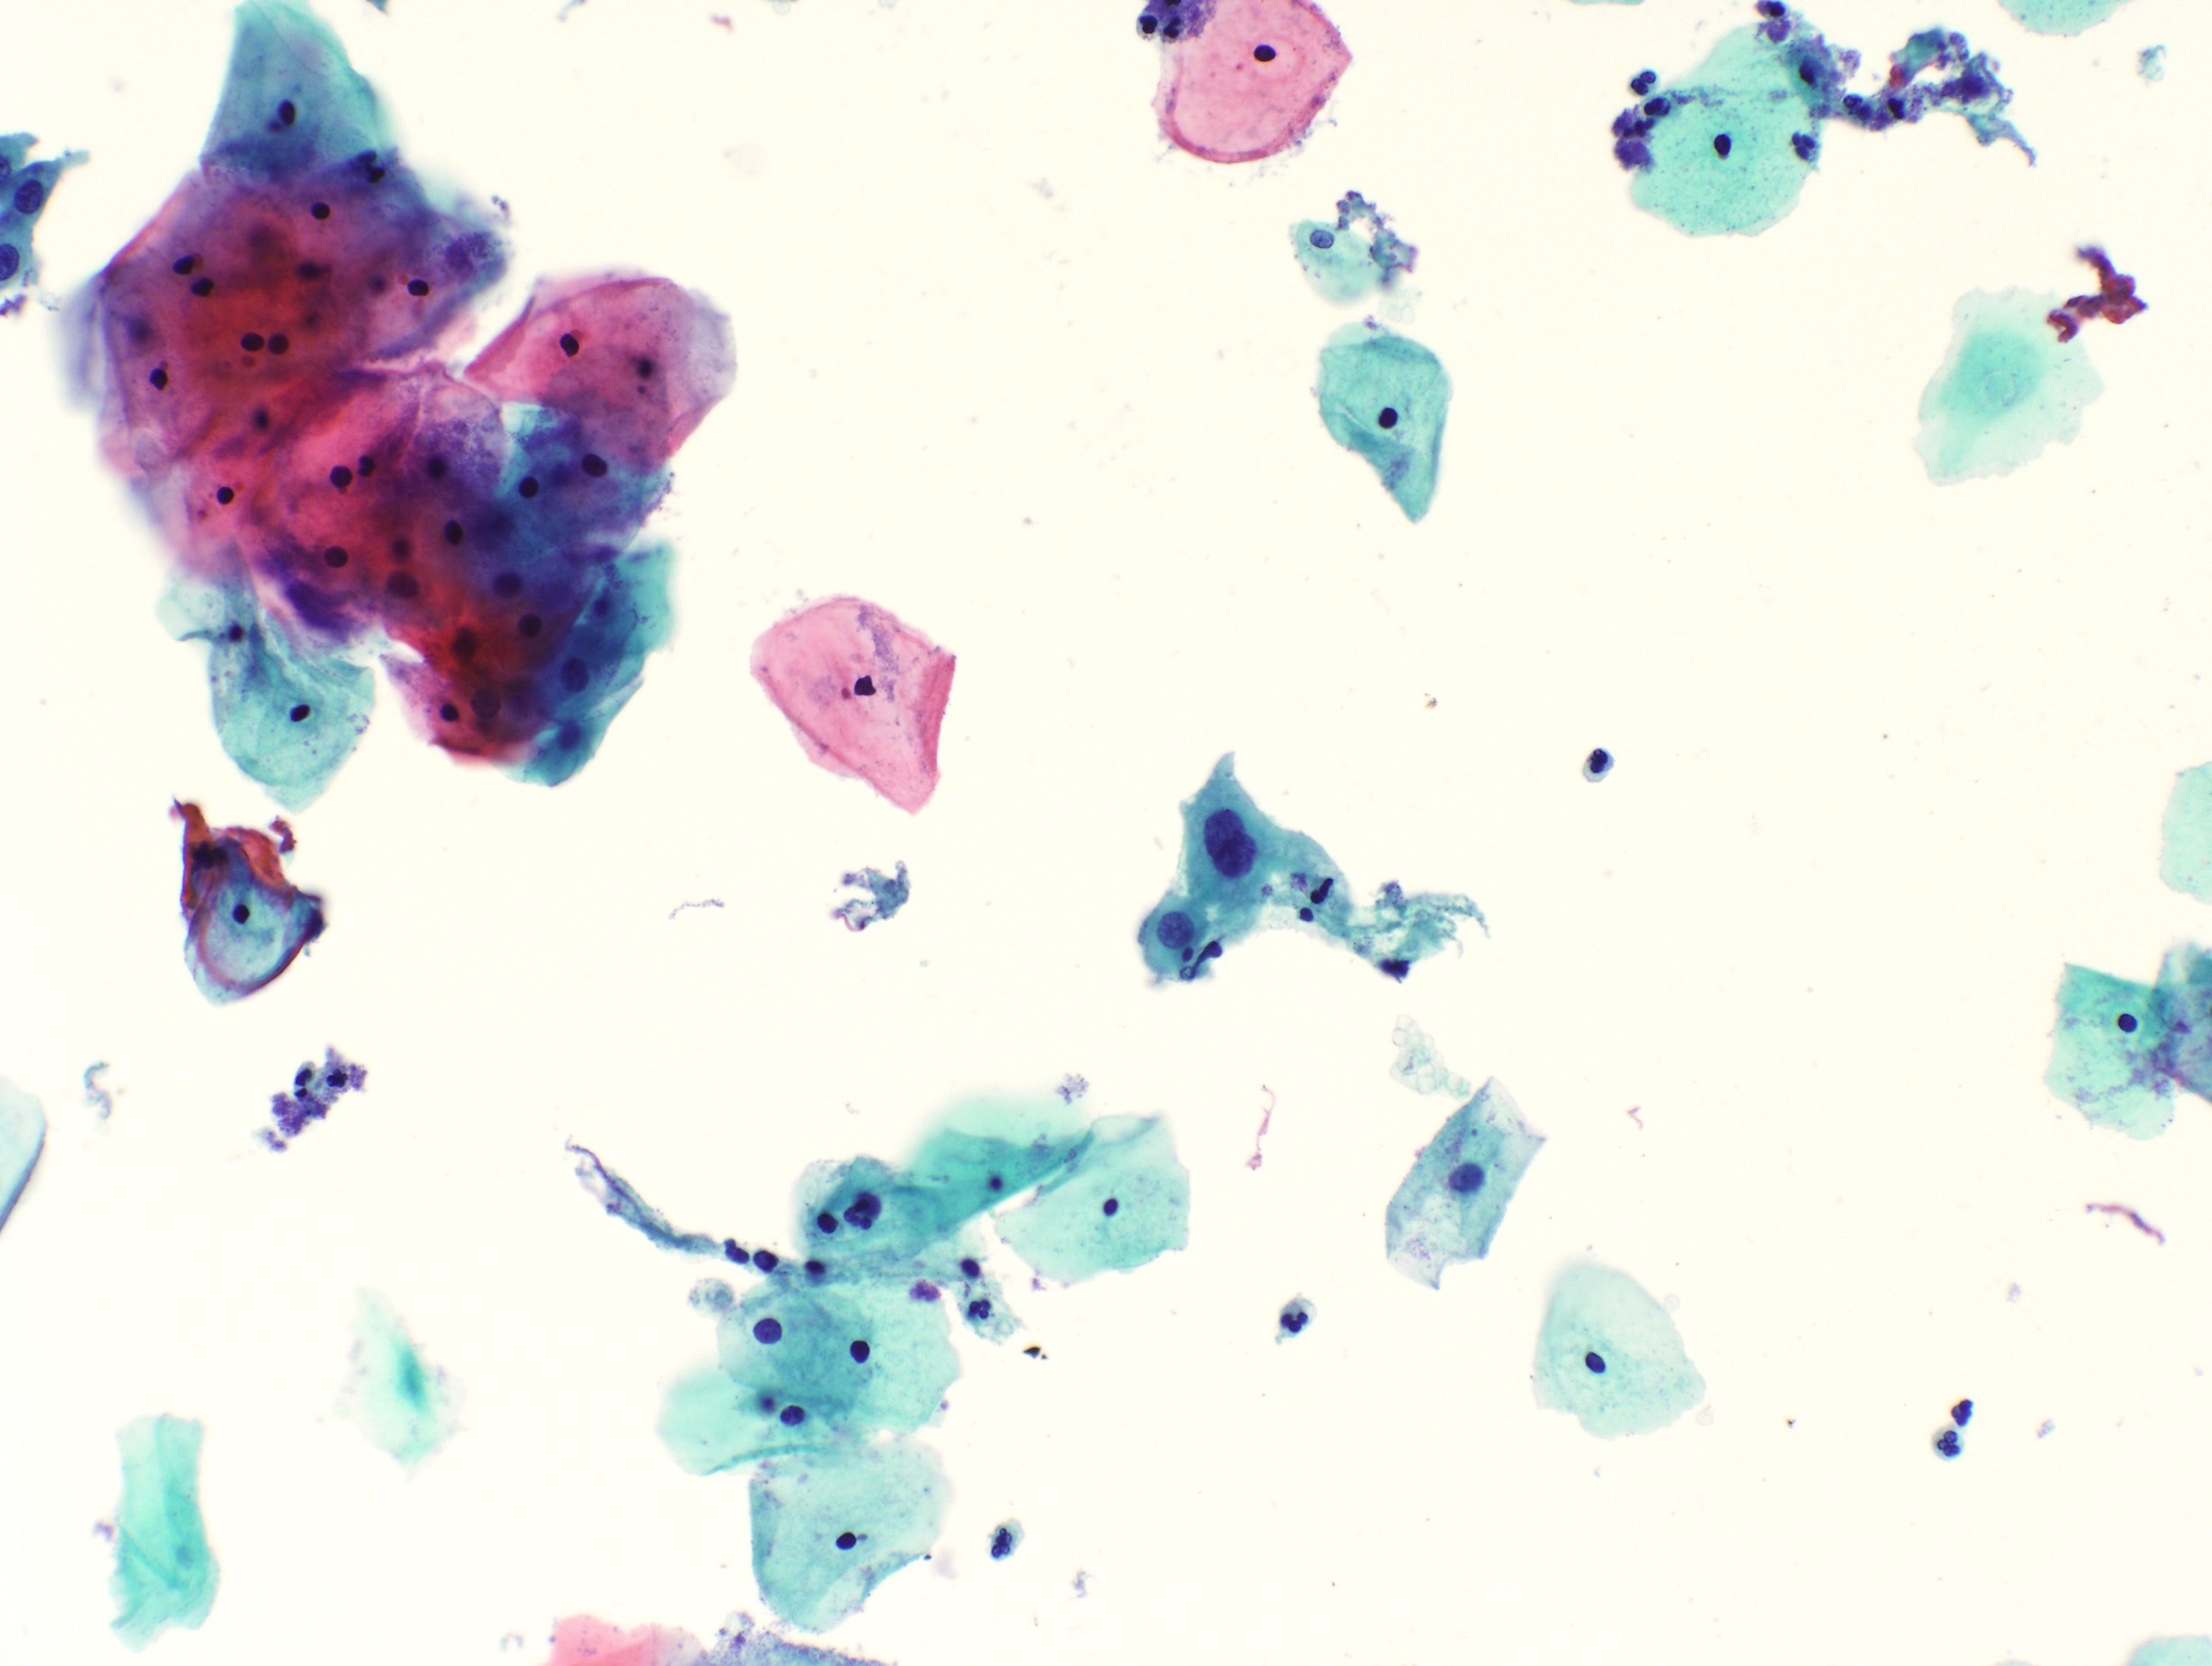 Binucleated cell with hyperchromasia, LSIL